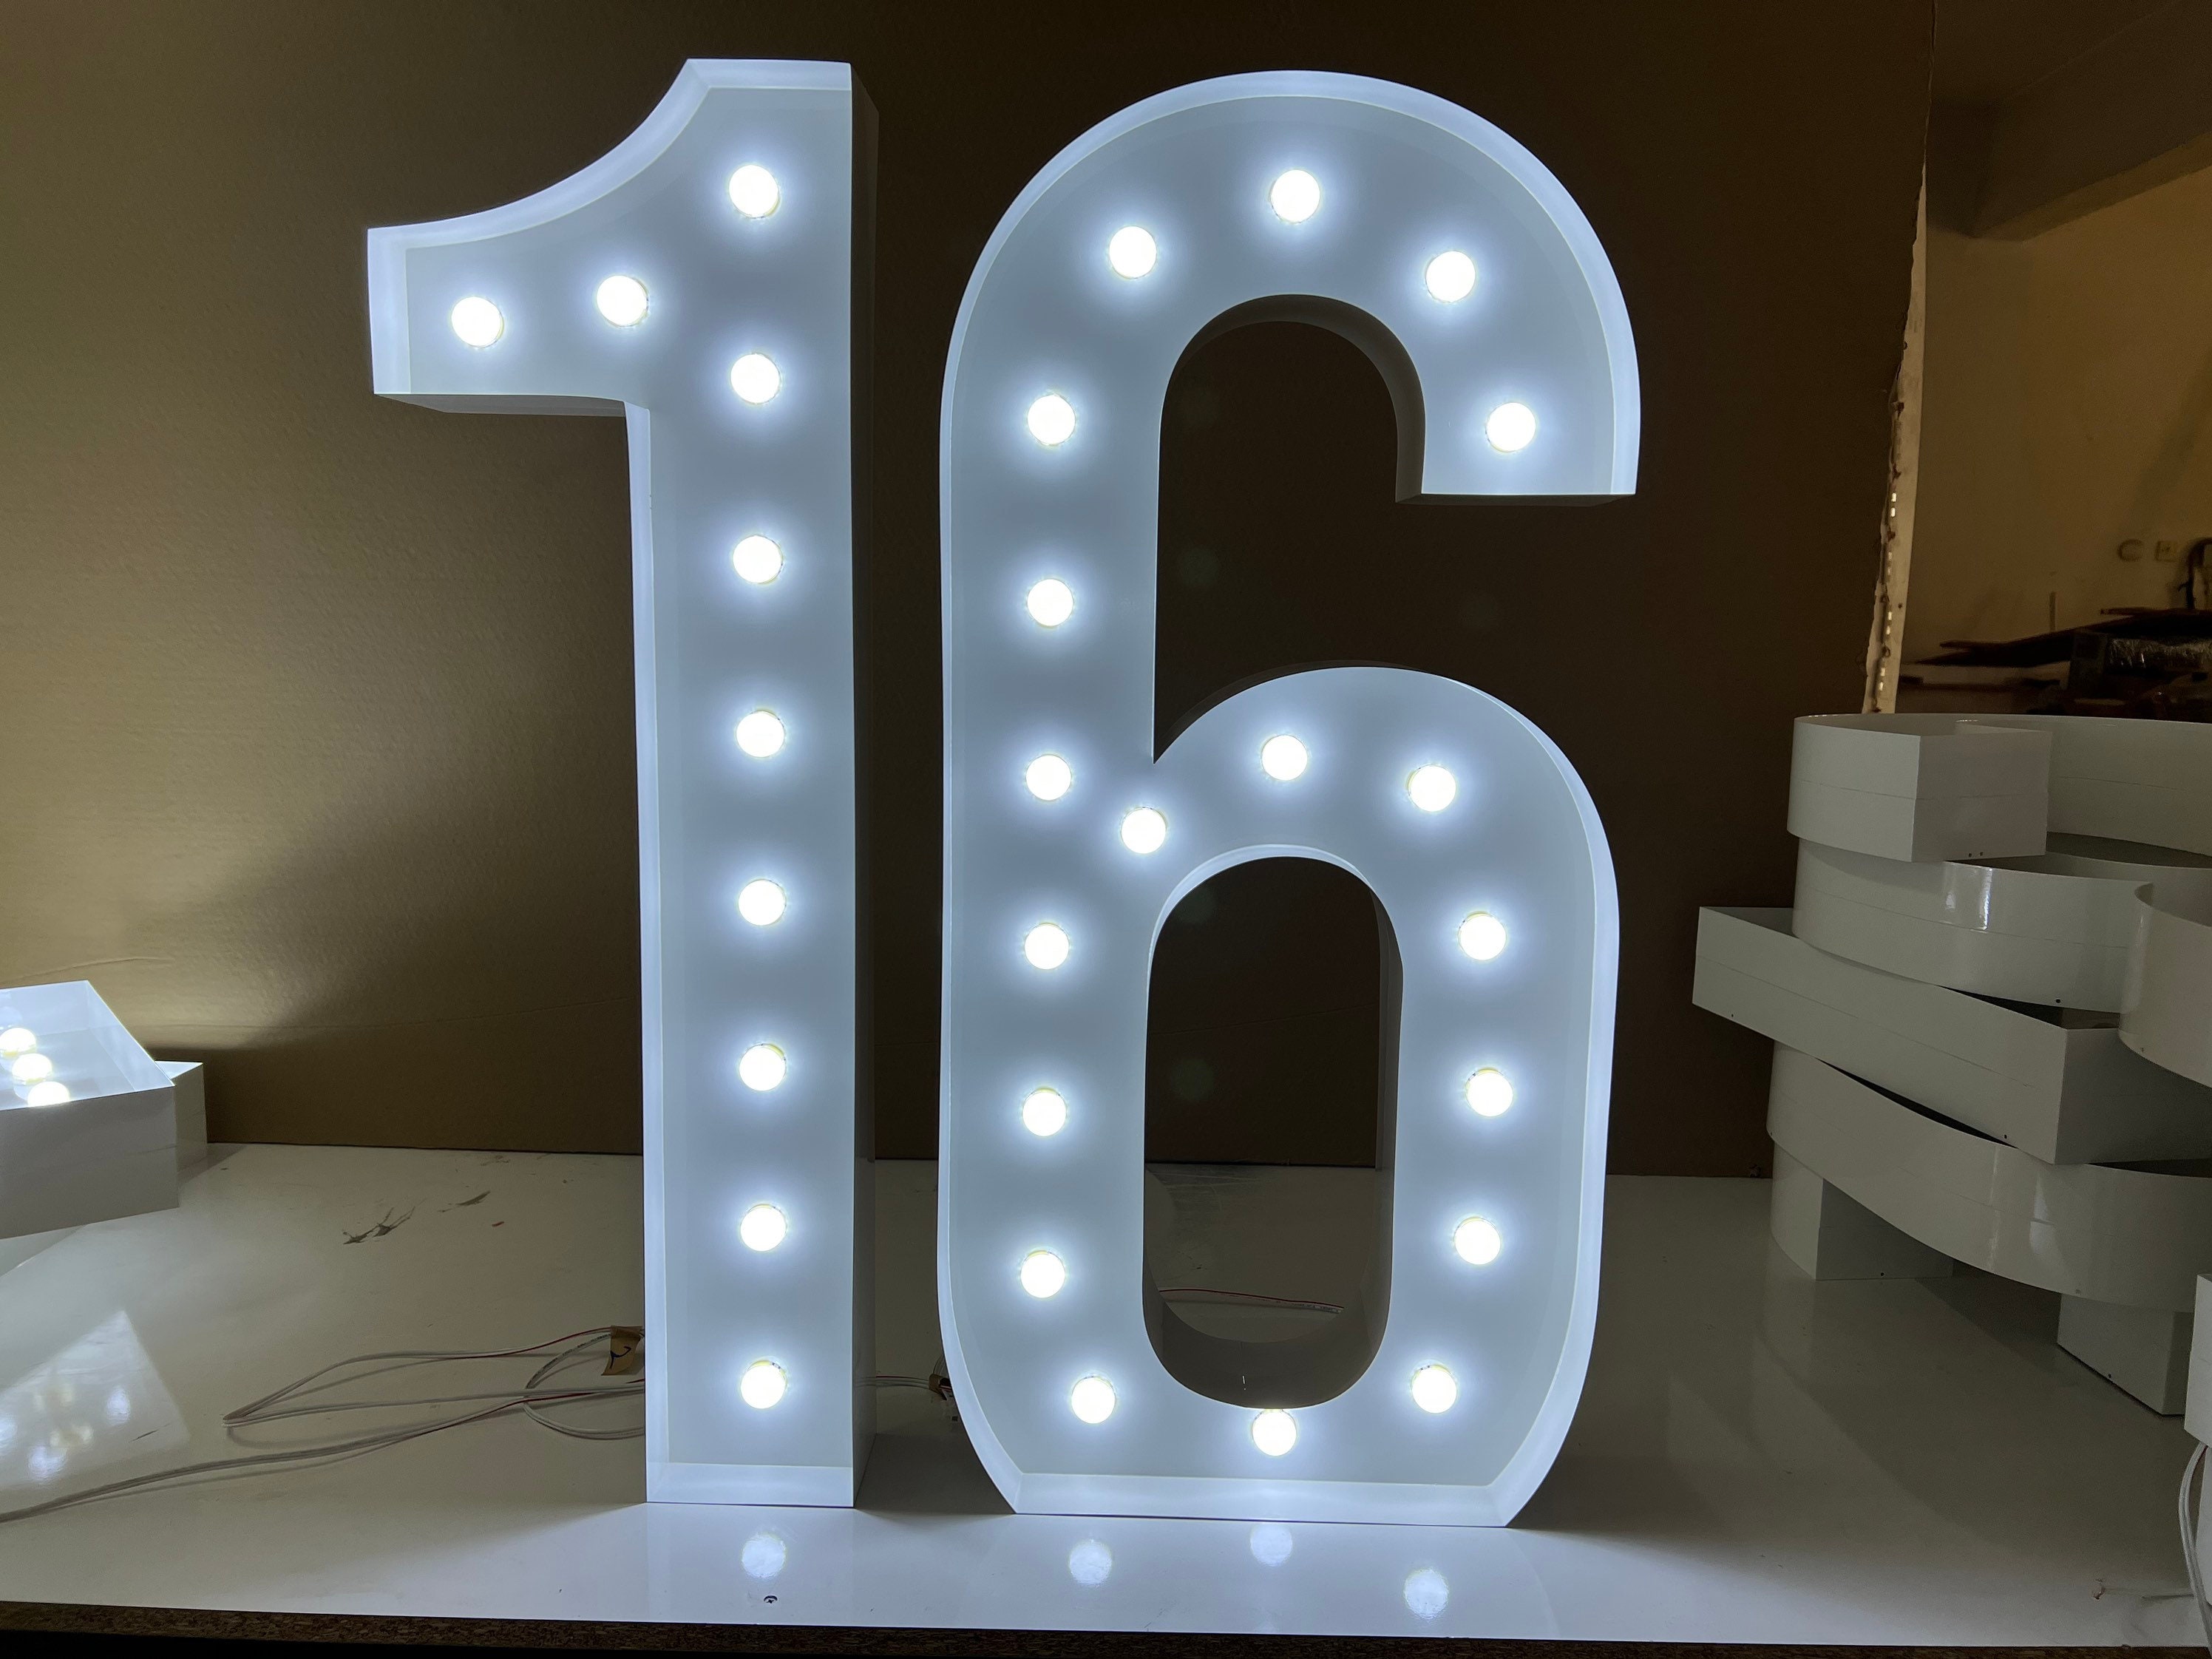 8 Light up Number, Cardboard Number, Battery Operated, Marquee Number,  Birthday Decorations, 